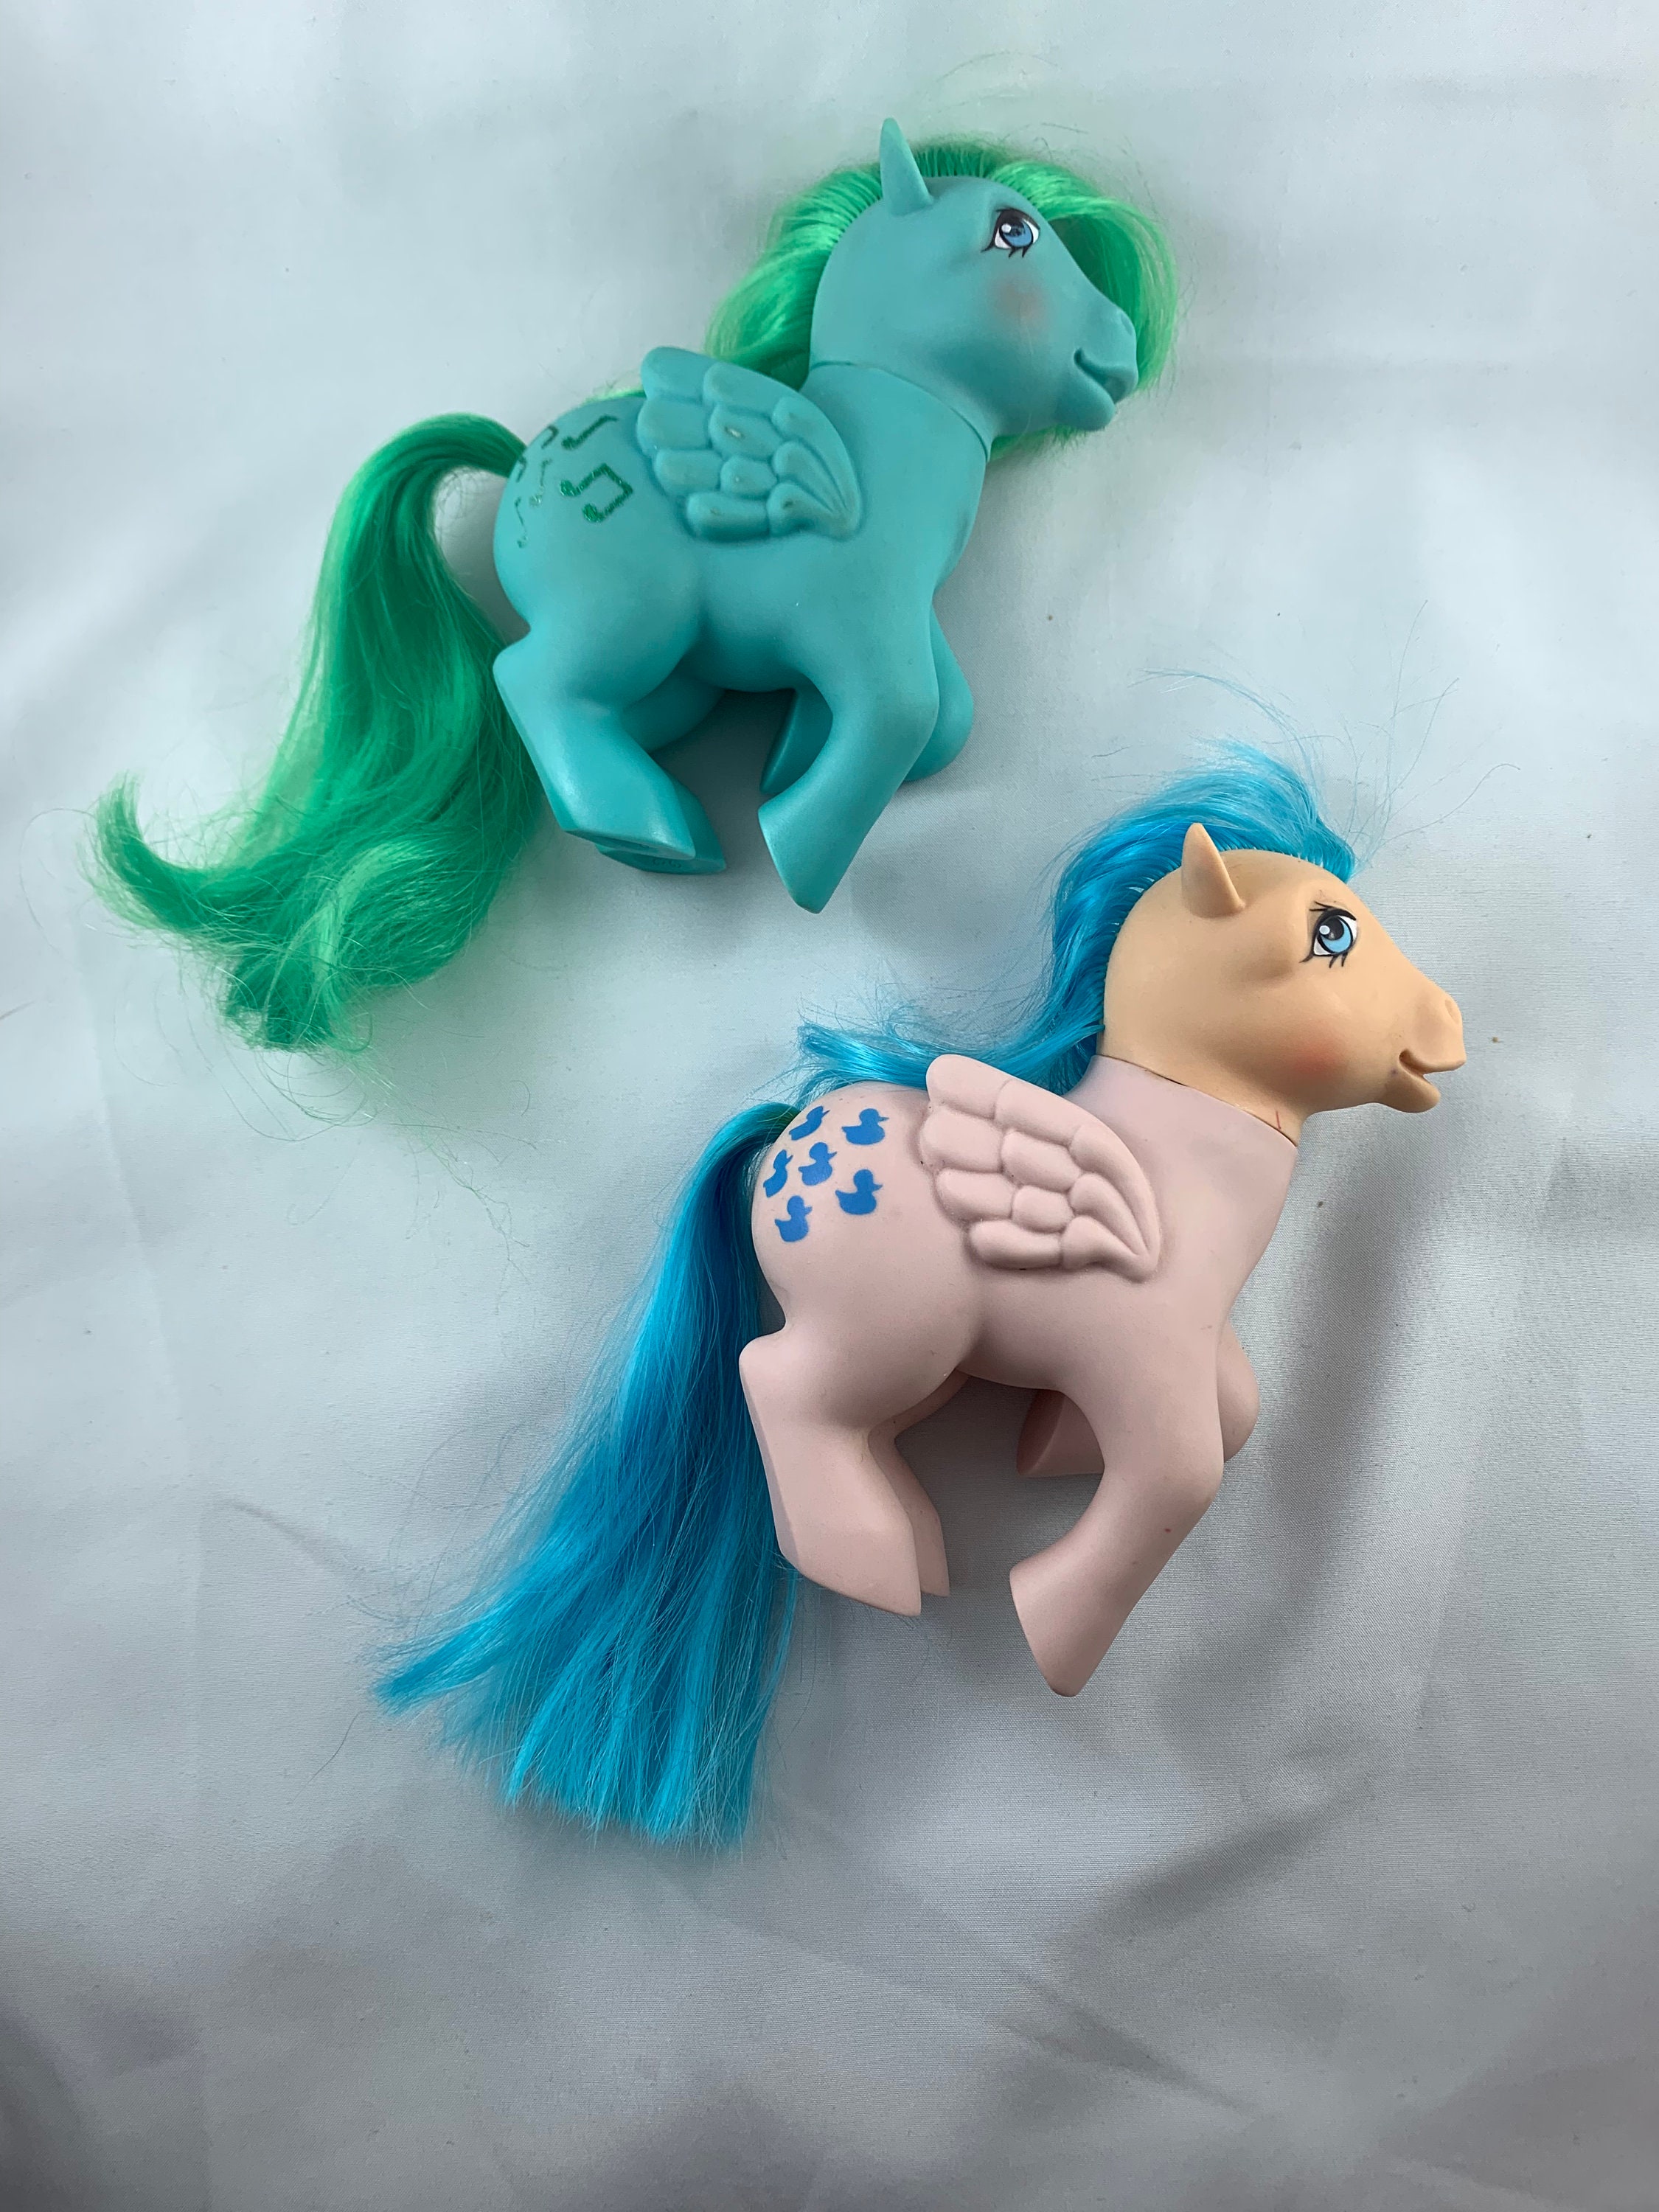 World's Smallest My Little Pony (Style 1) Firefly and Minty